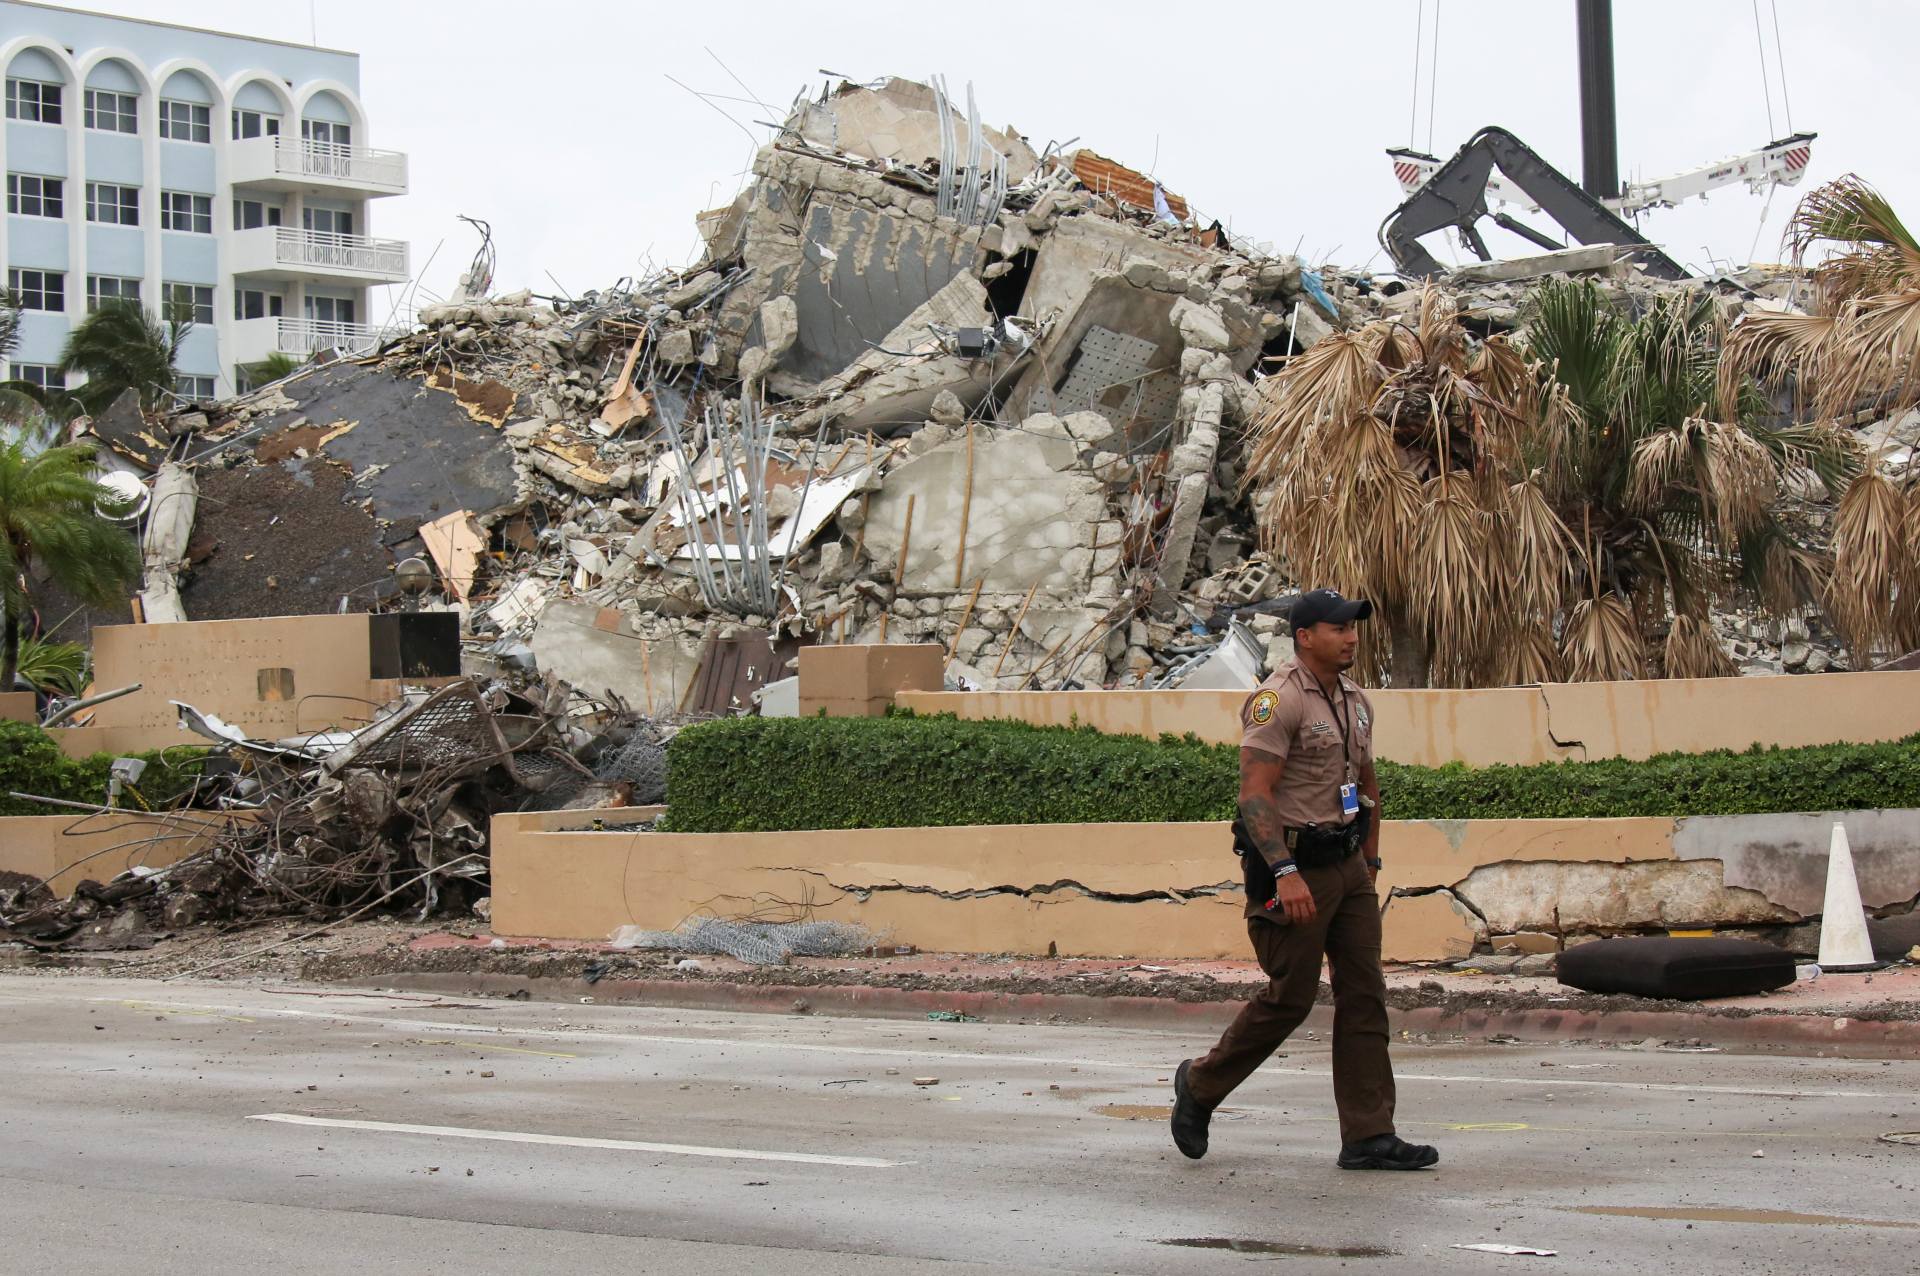 US: Florida condo tower death toll rises to 60